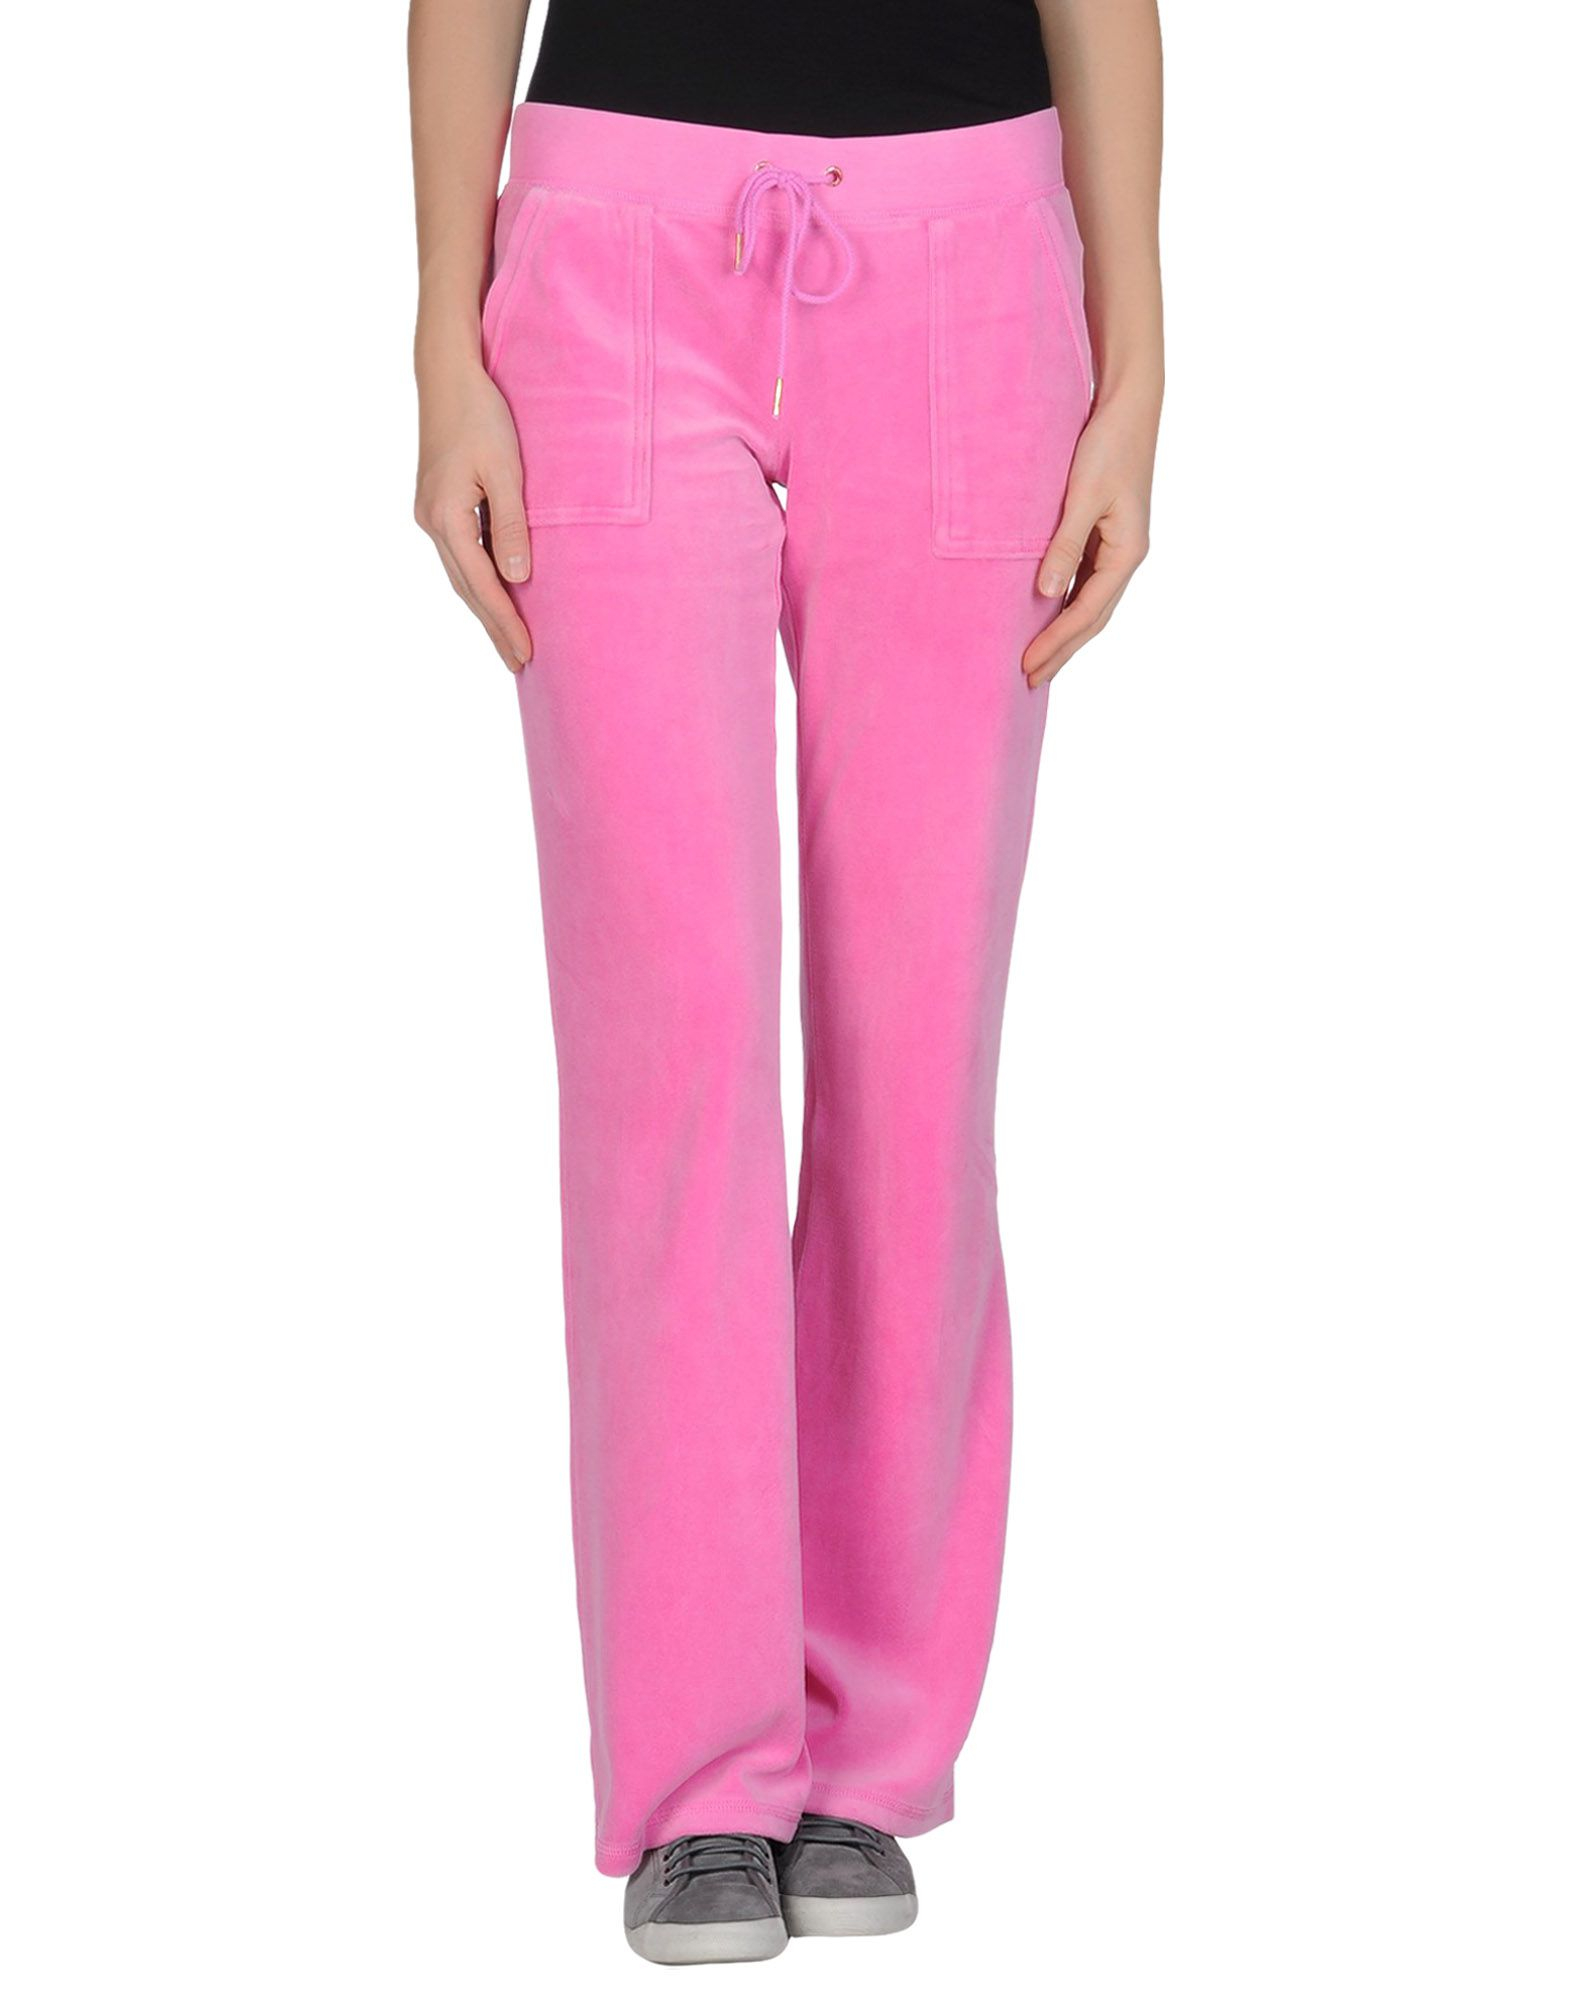 Juicy Couture Sweat Pants in Pink (Light purple) | Lyst